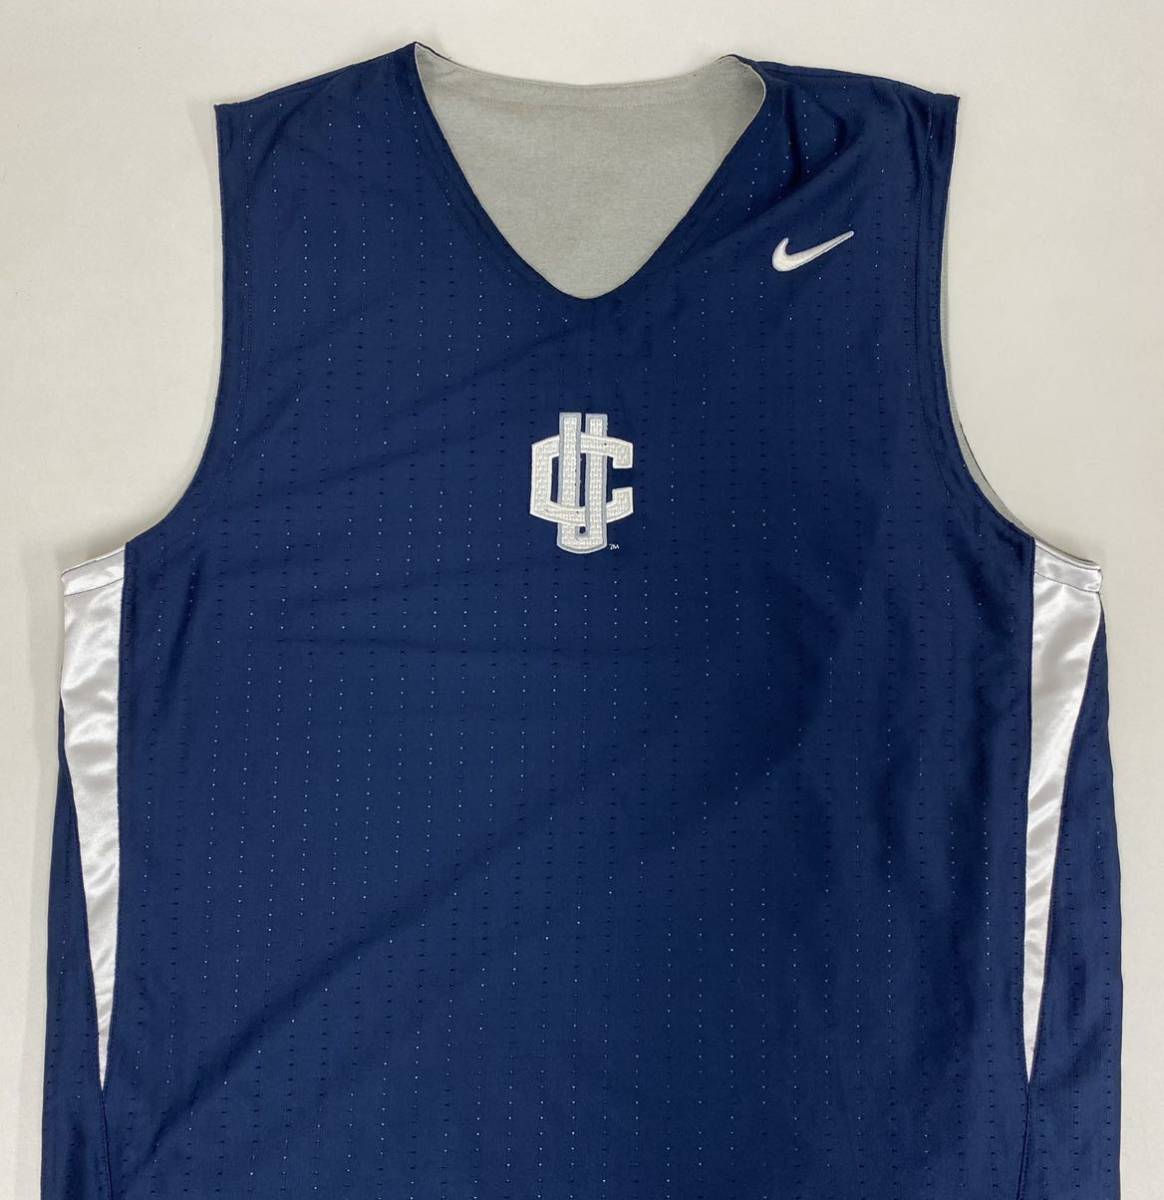 #(NIKE basketball wear ) connector chi cut large University of Connecticut UCONN reversible tank top L(US size ) USED